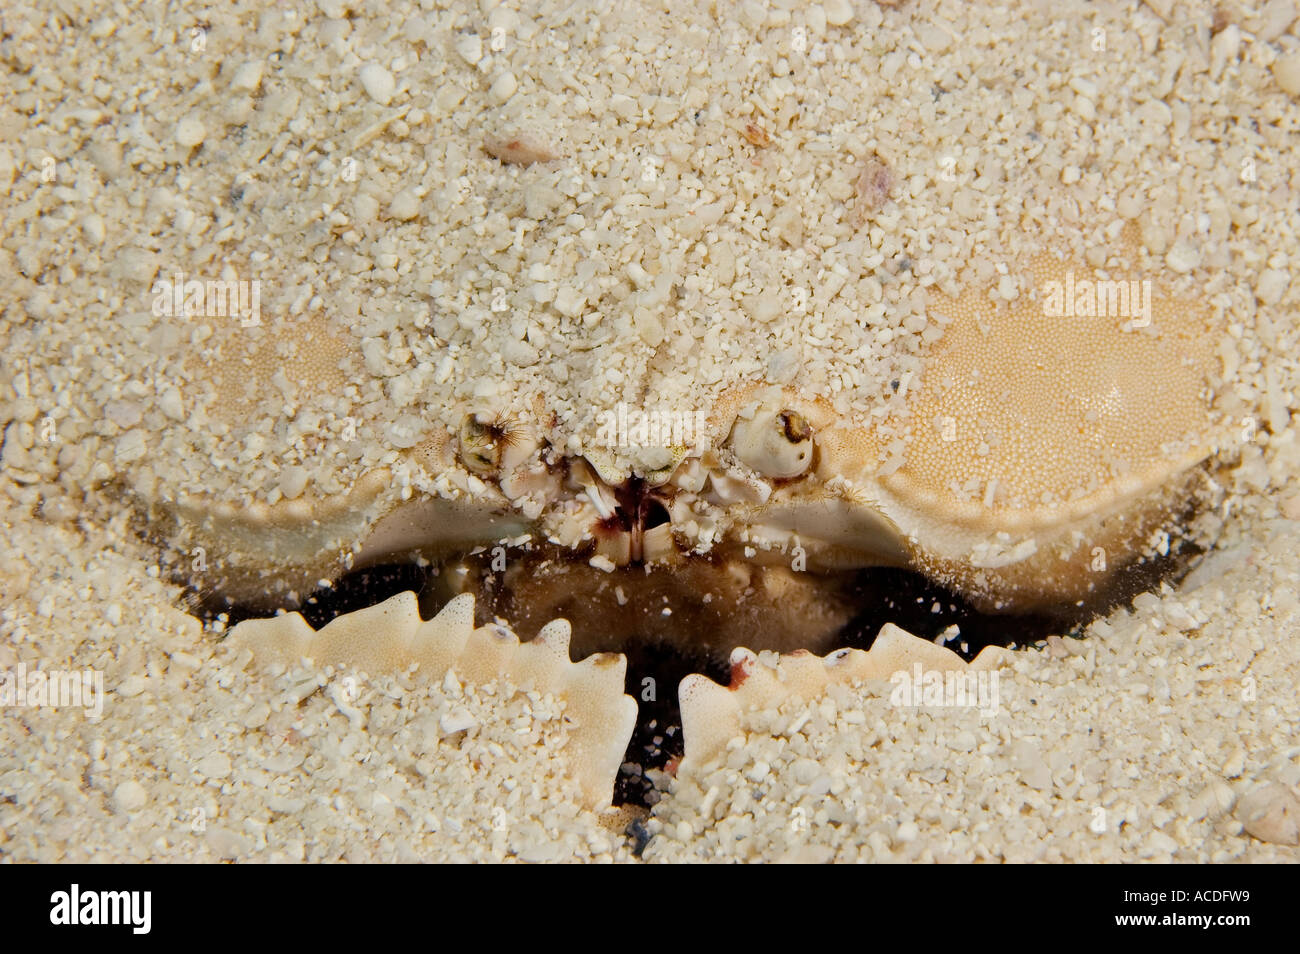 Shame Faced Crab Calappa calappa this crab can bury itself into the sand to avoid predators Yap Micronesia Pacific Ocean Stock Photo